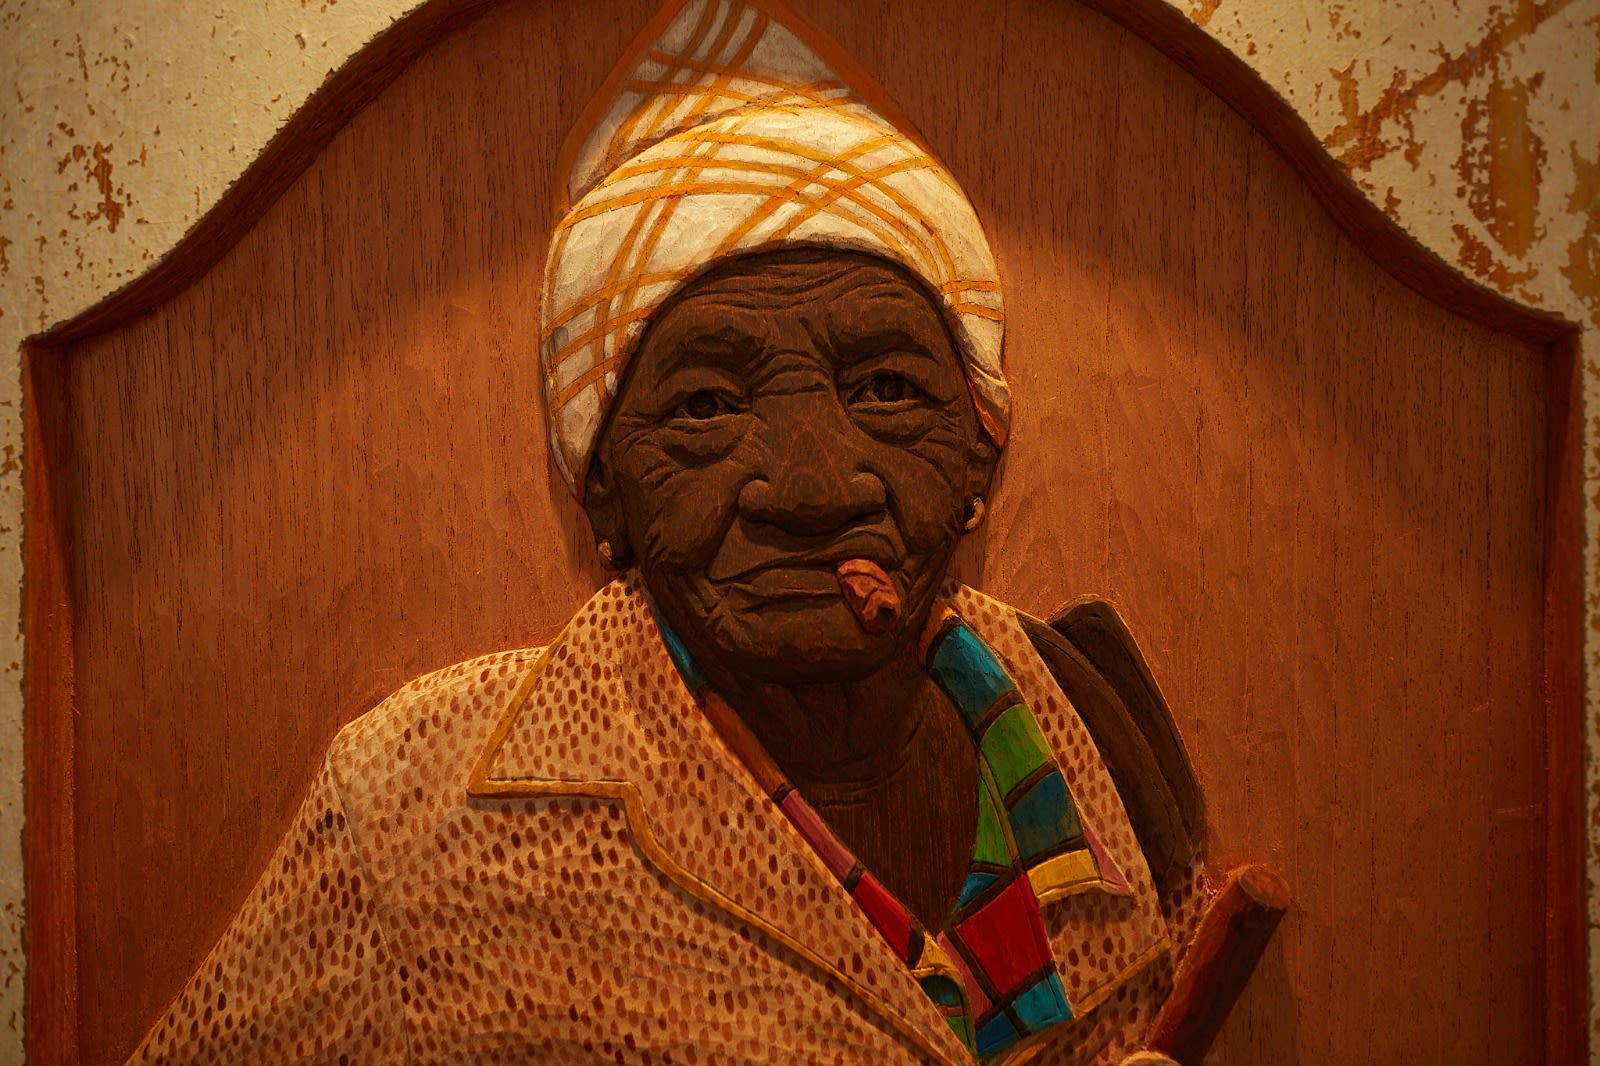 a photograph of a wooden bas-relief on a wall of an old Cuban woman with a cigar in her mouth, wearing a head scarf and a colourful collared shirt.